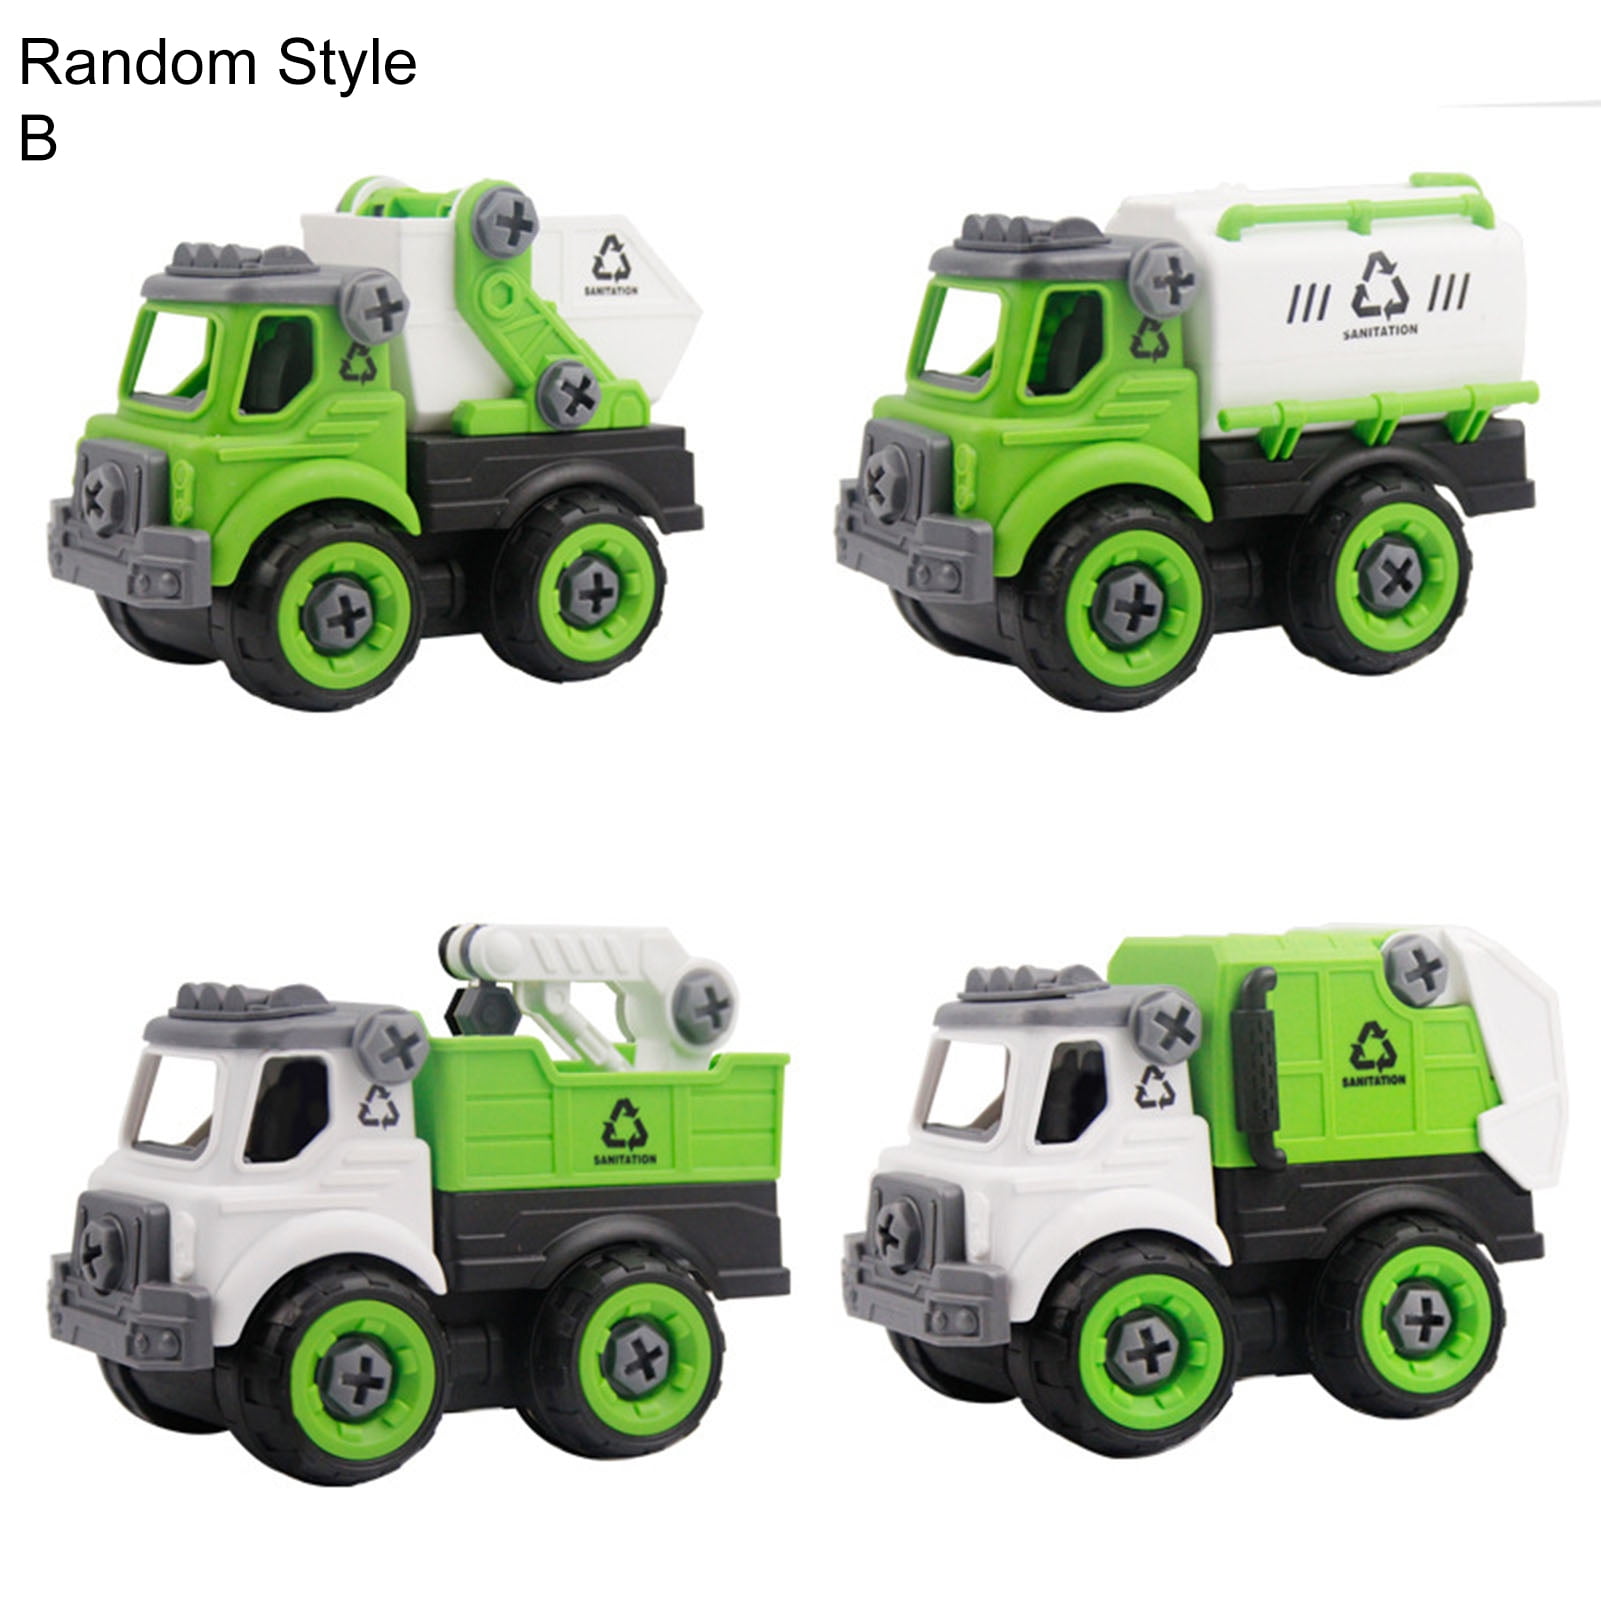 Plastic Engineering Vehicle Toys Construction Model Set for Kids Puzzle Toys 